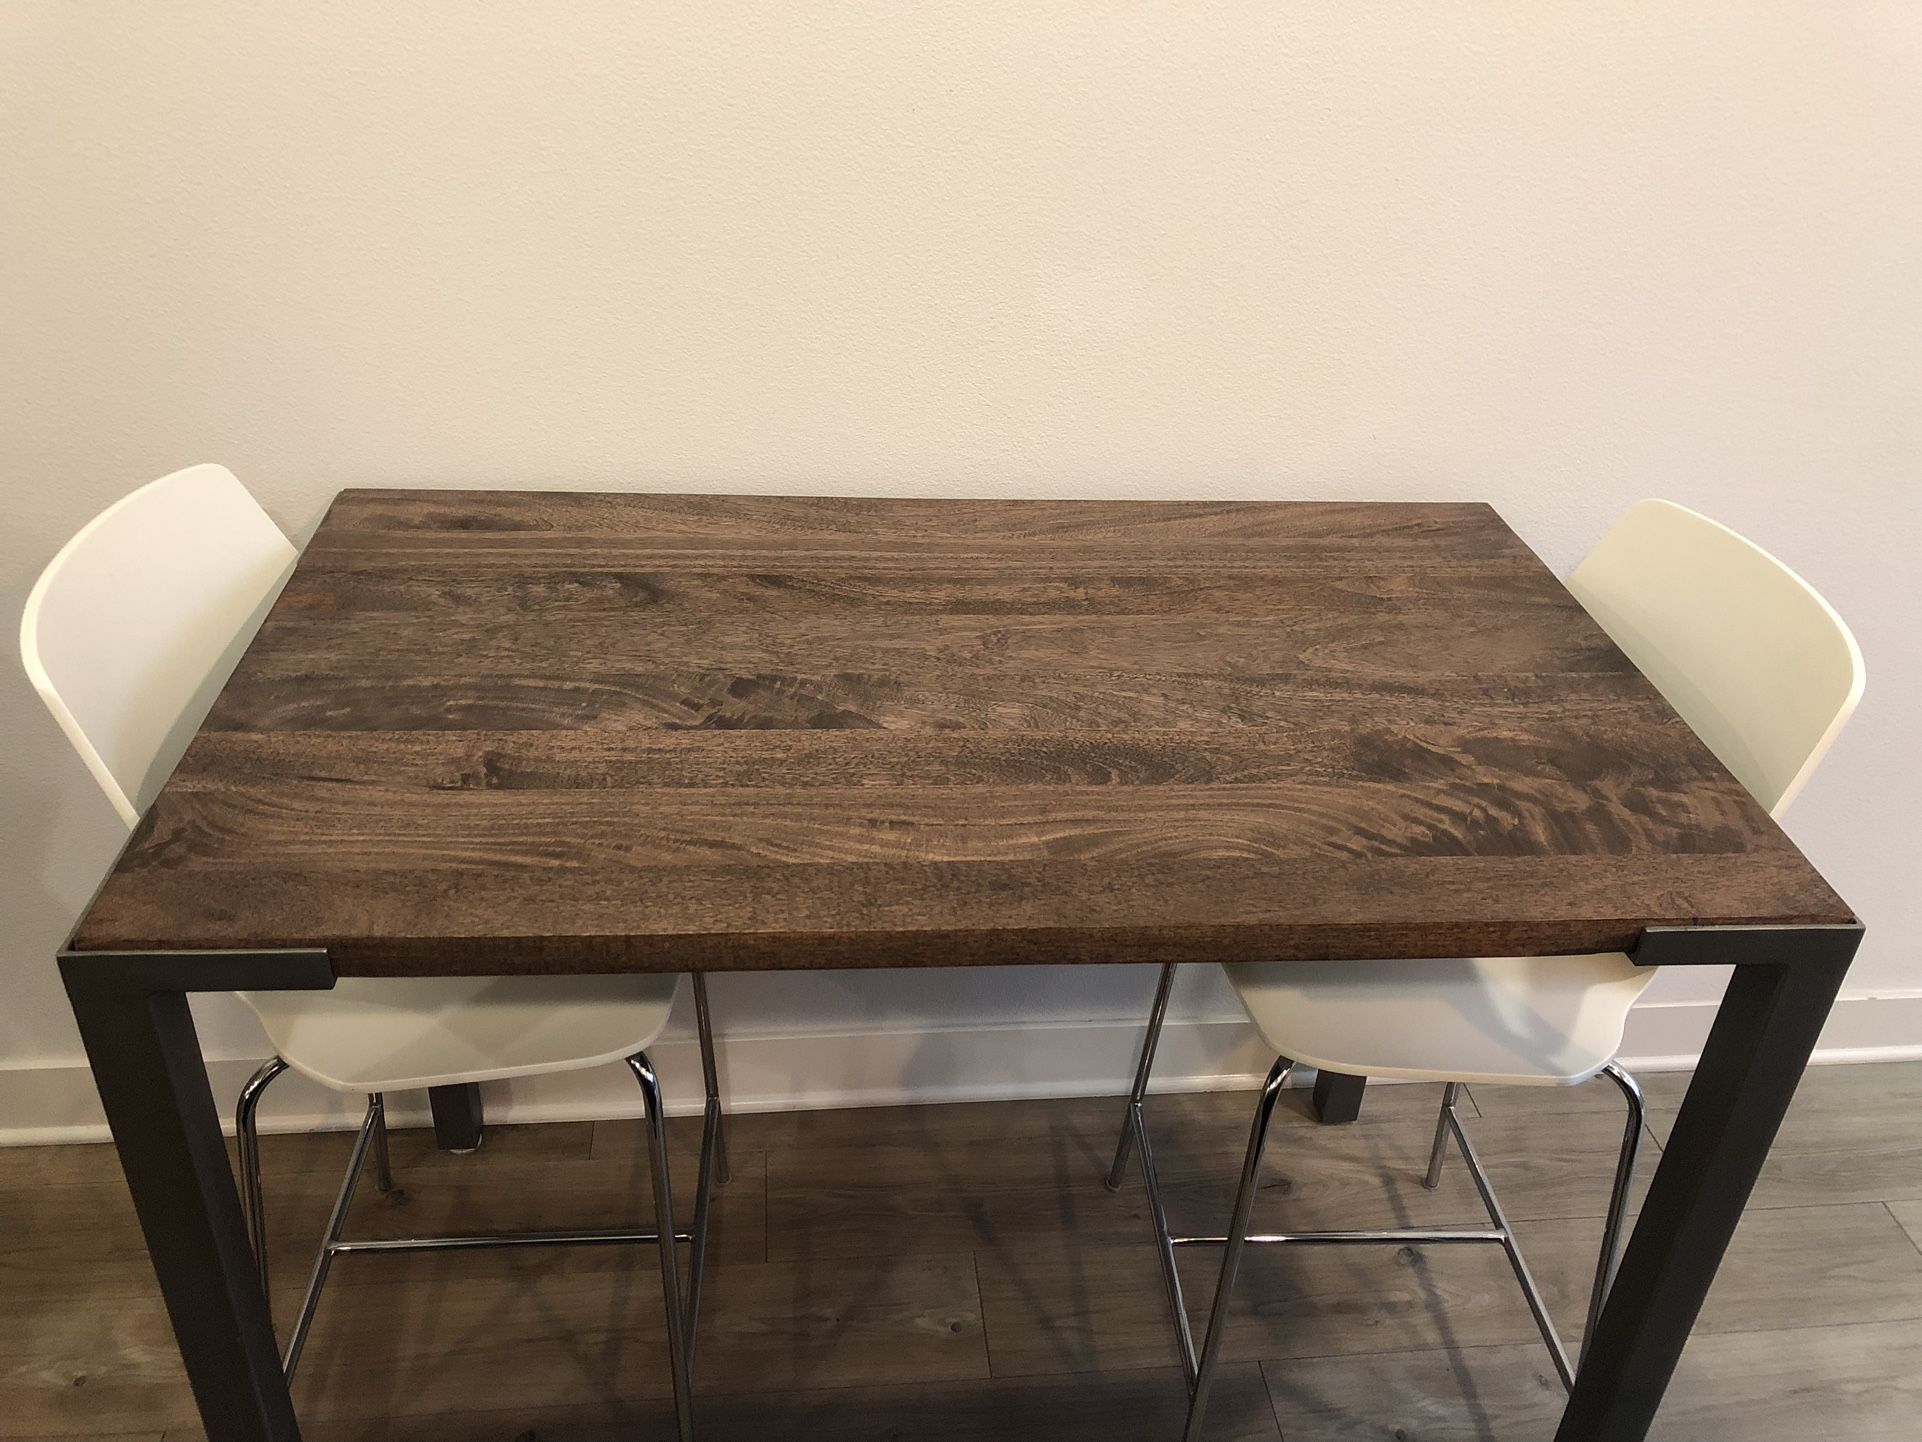 CB2 Bar Height kitchen Table And 2 Room And Board chairs